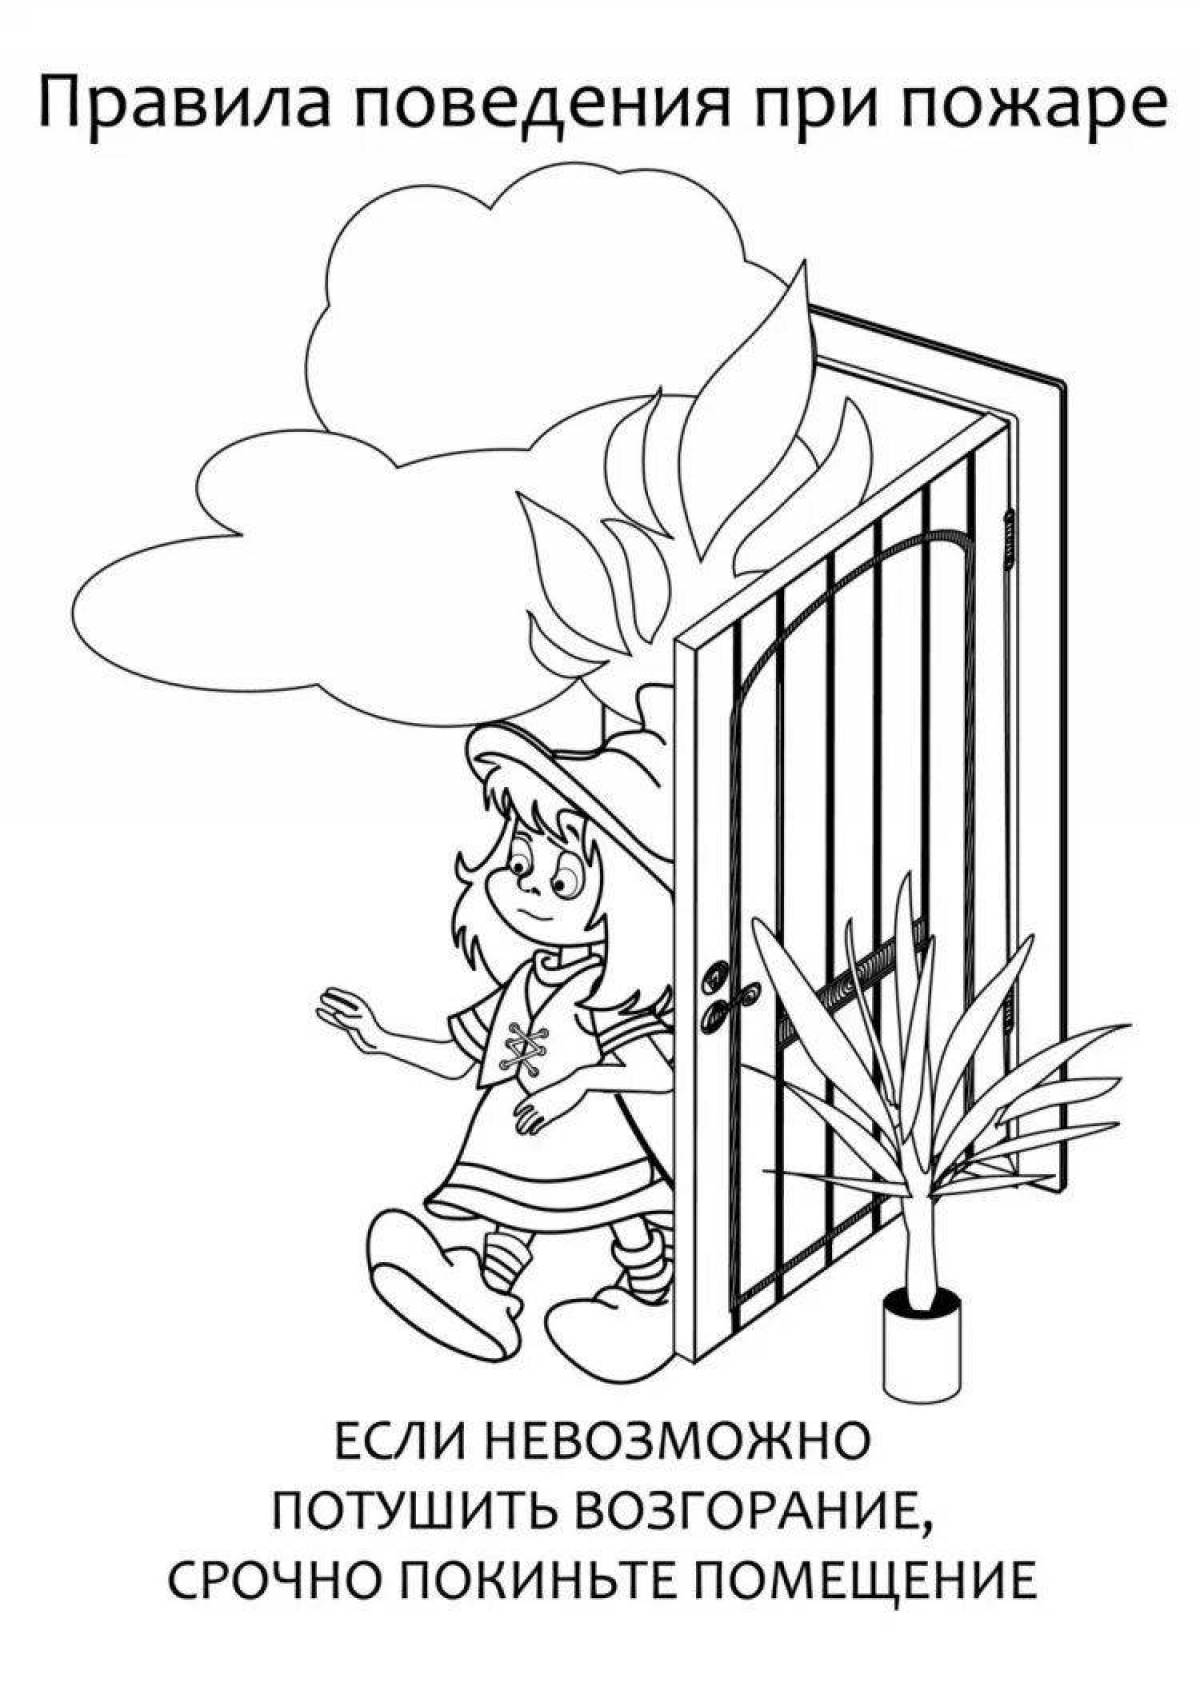 Educational coloring book for children safety at home